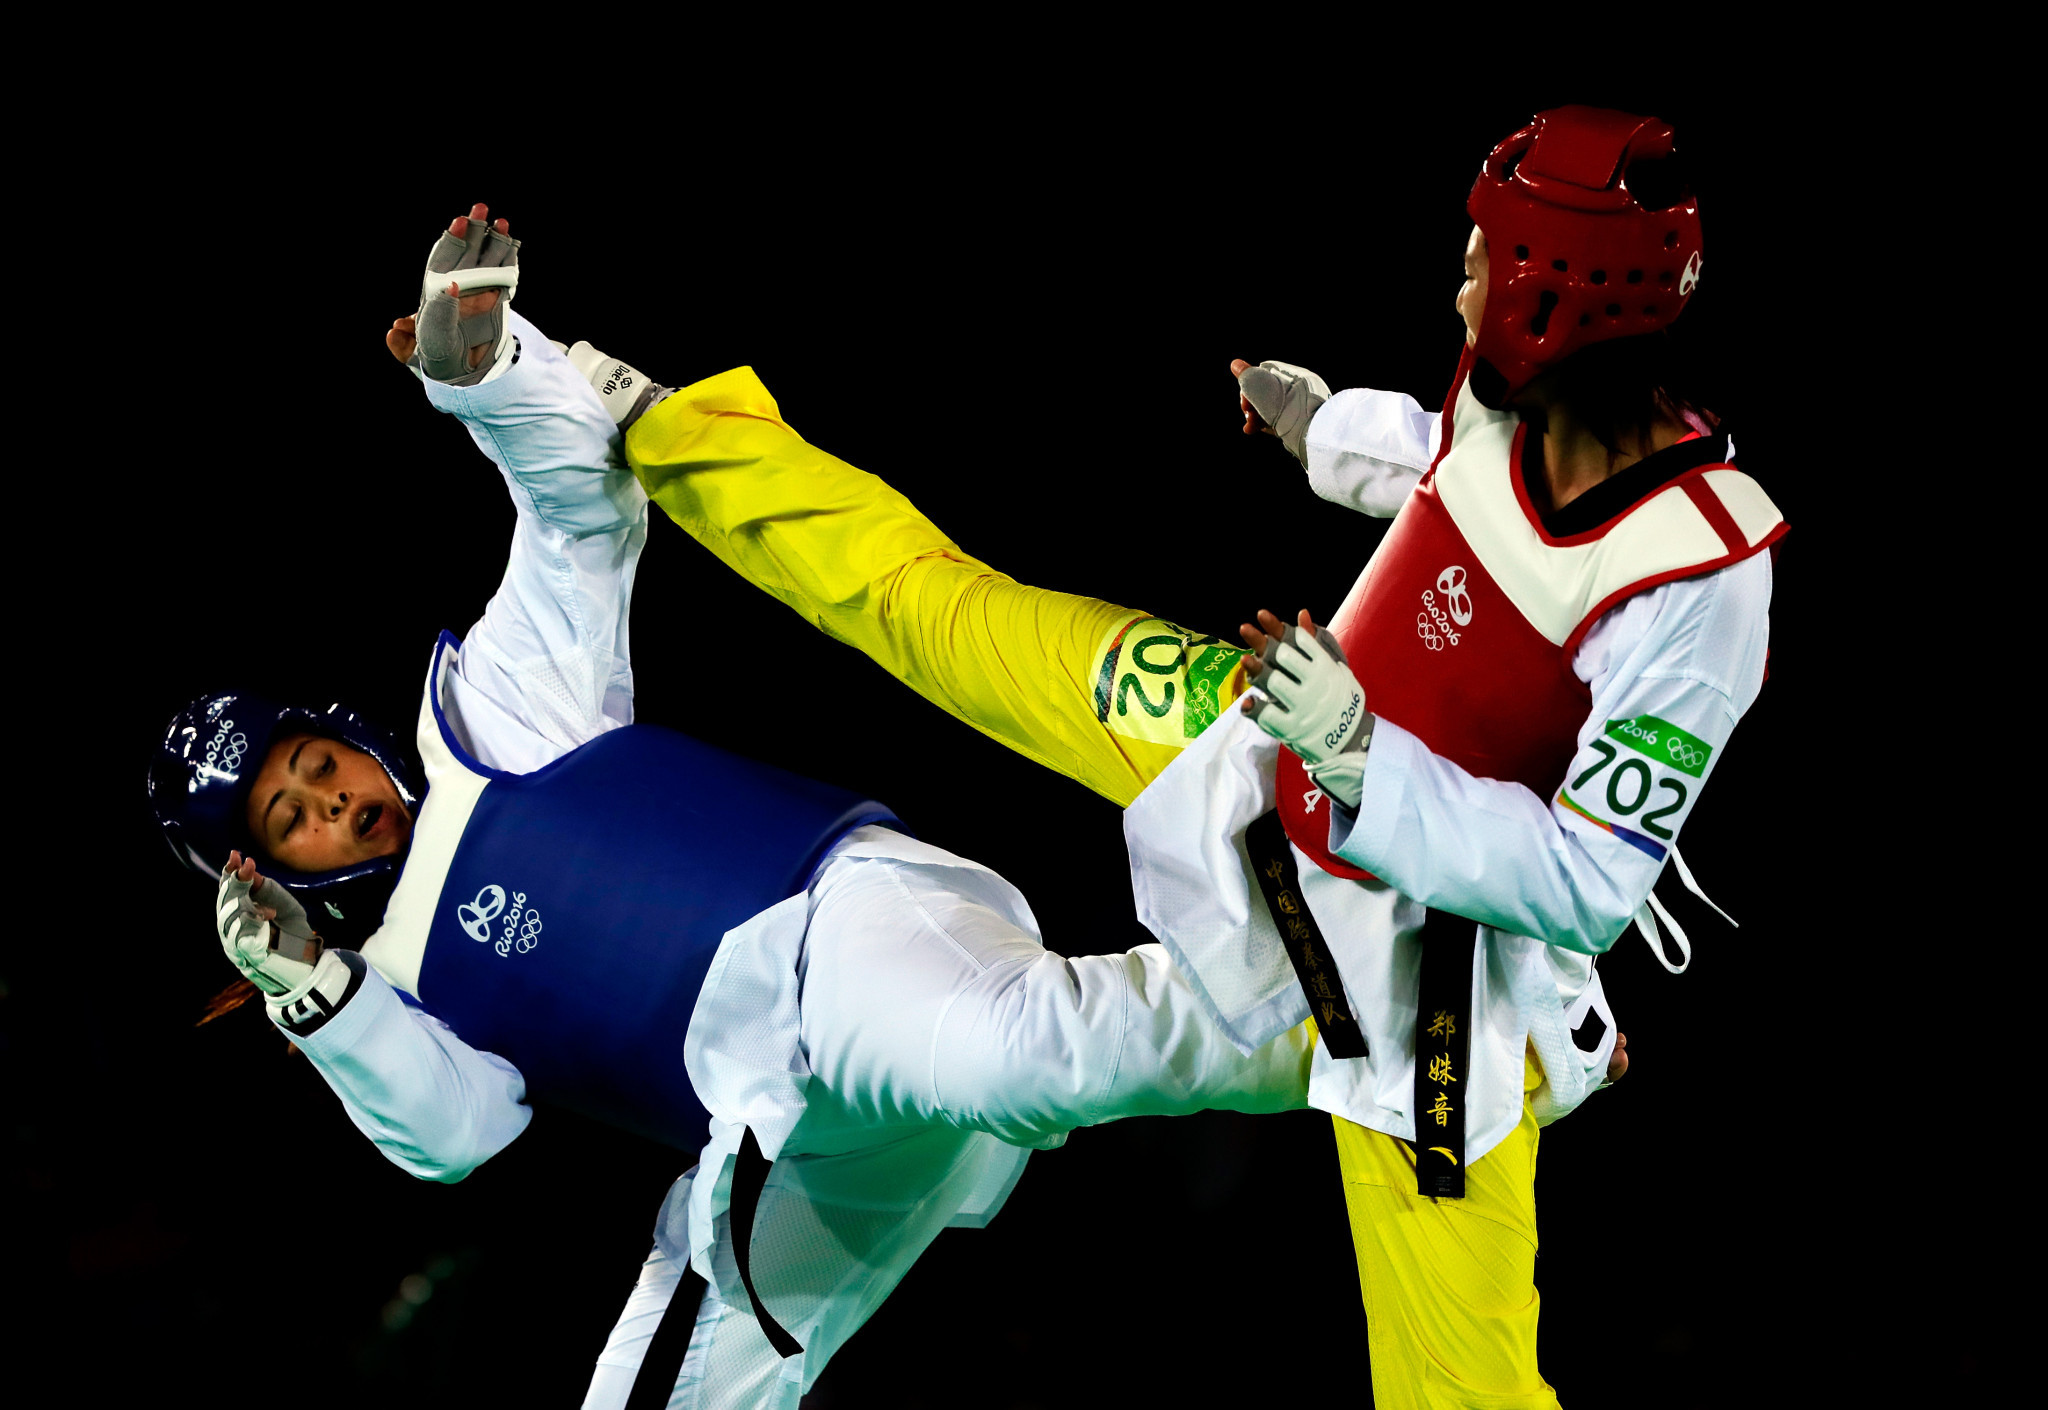 Nisha Rawal of Nepal competes against Shuyin Zheng of China during the women's over-67 kilograms taekwondo competition at Rio 2016 - a sport the country will hope be represented in at Tokyo 2020 ©Getty Images